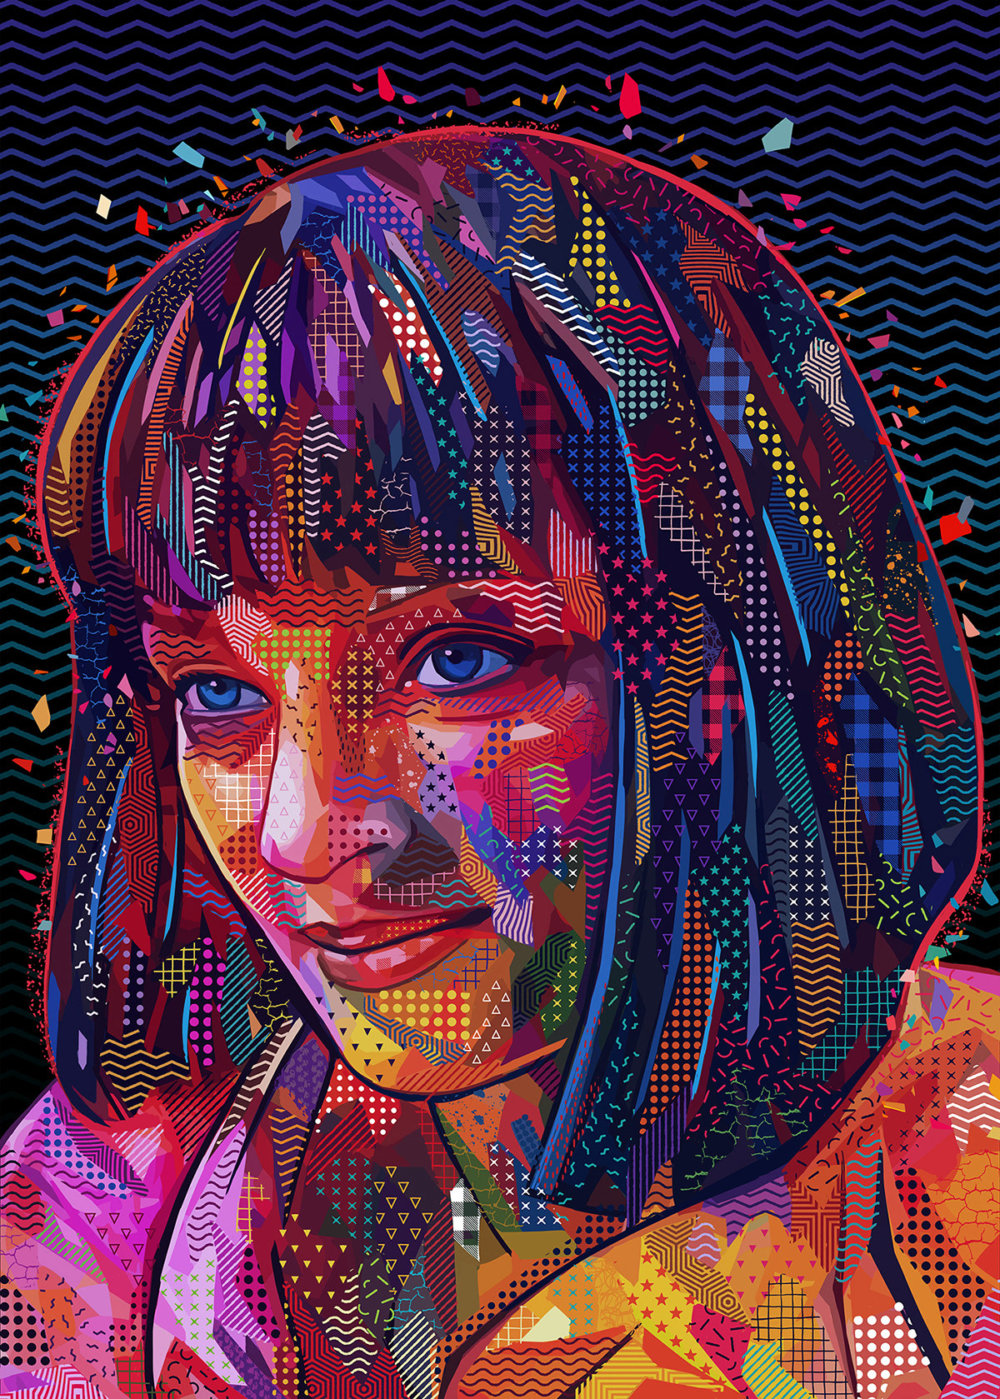 Pop Portraits Illustrations Of Pop Culture Icons In Colorful Patterns By Alessandro Pautasso 6